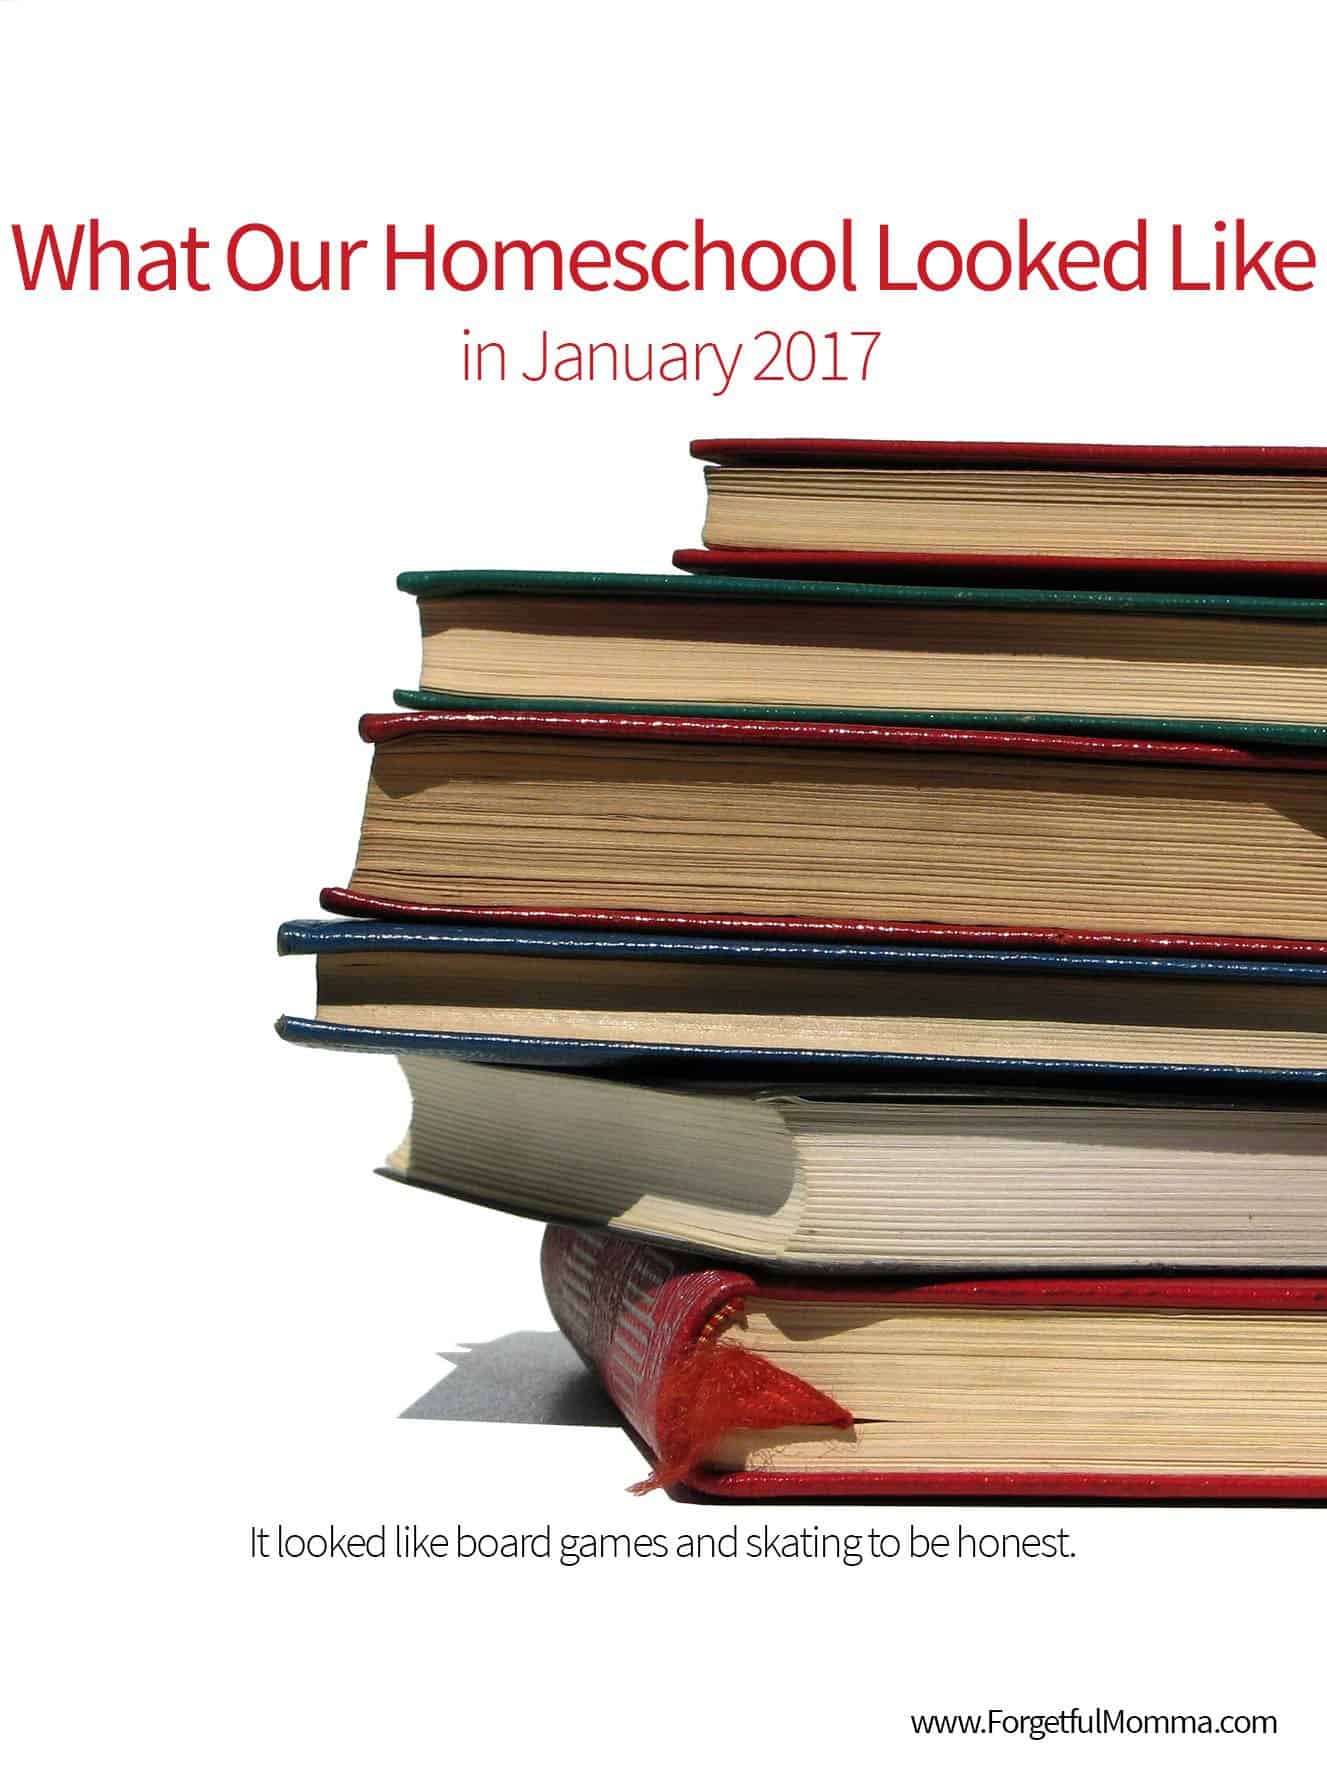 What Our Homeschool Looked Like in January 2017